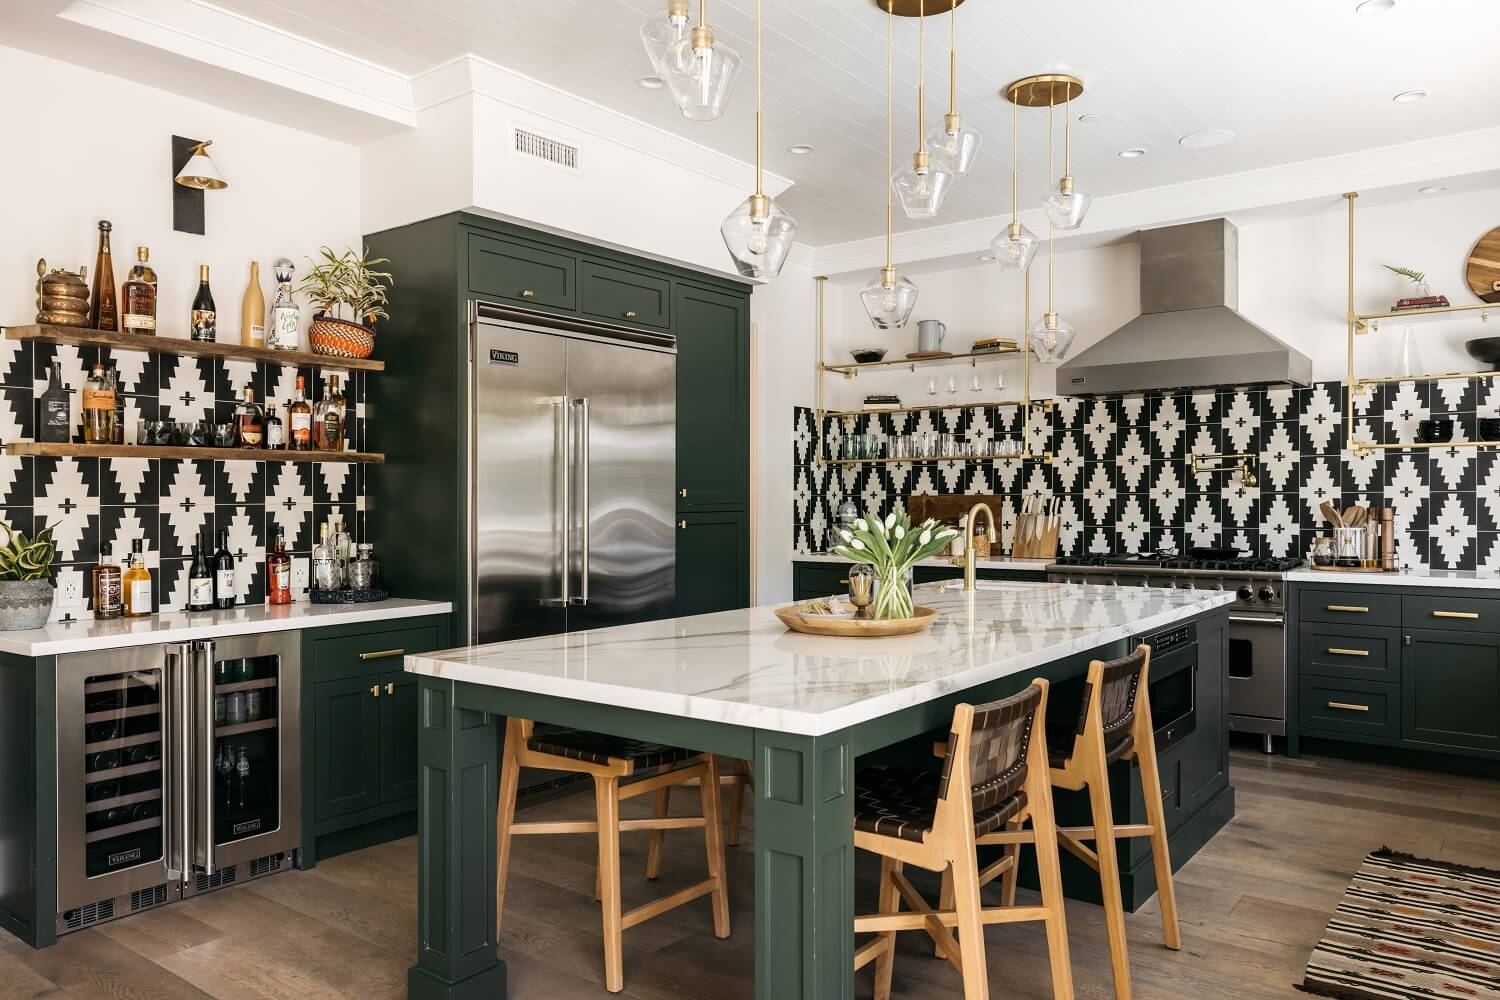 green-kitchen-cabinets-black-white-geometric-tiles-daveed-diggs-emmy-raver-lampman-nordroom